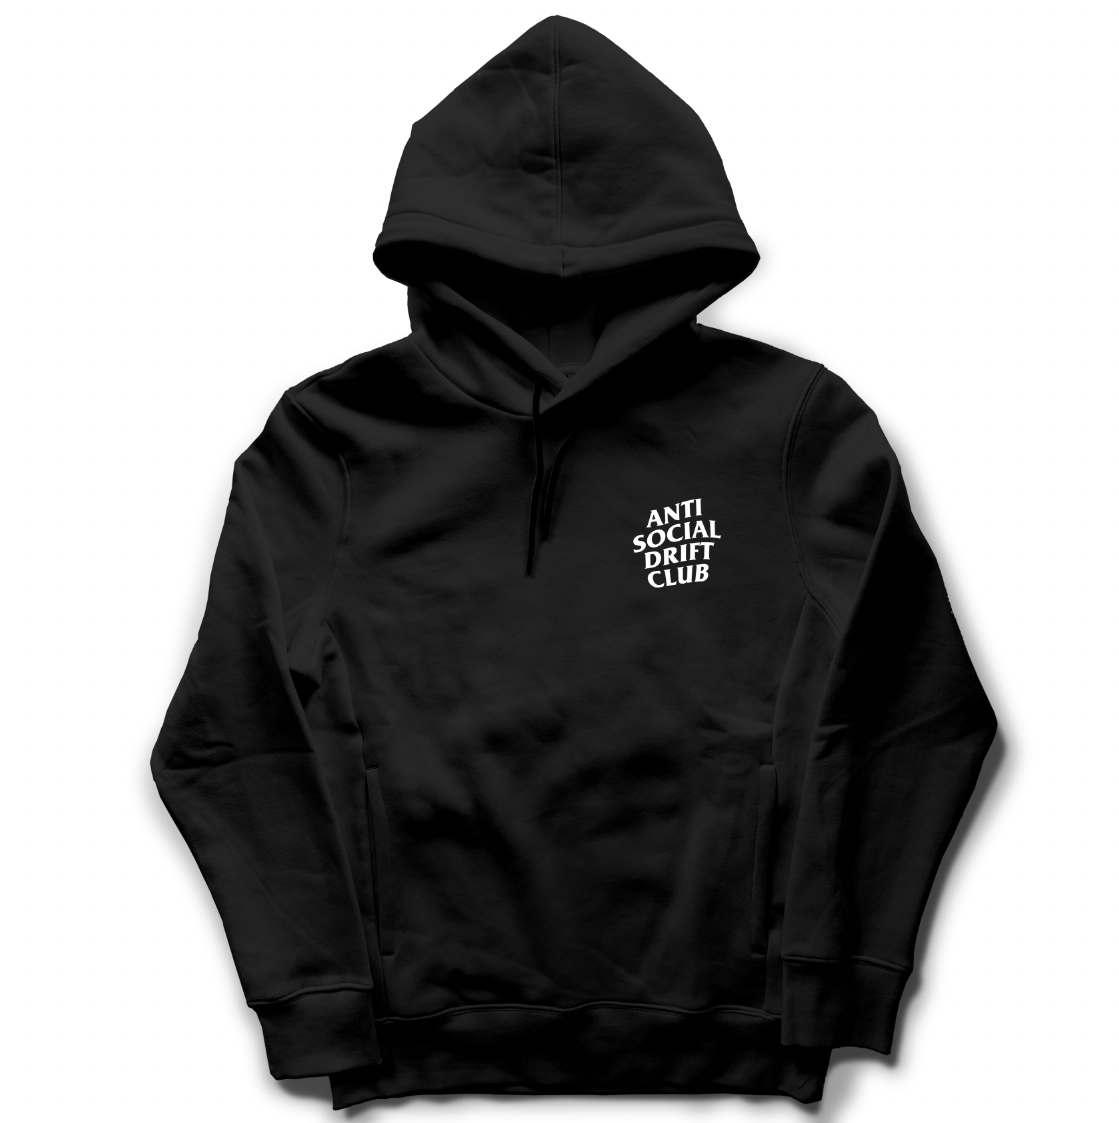 NEW HOODIES – Strictly Static